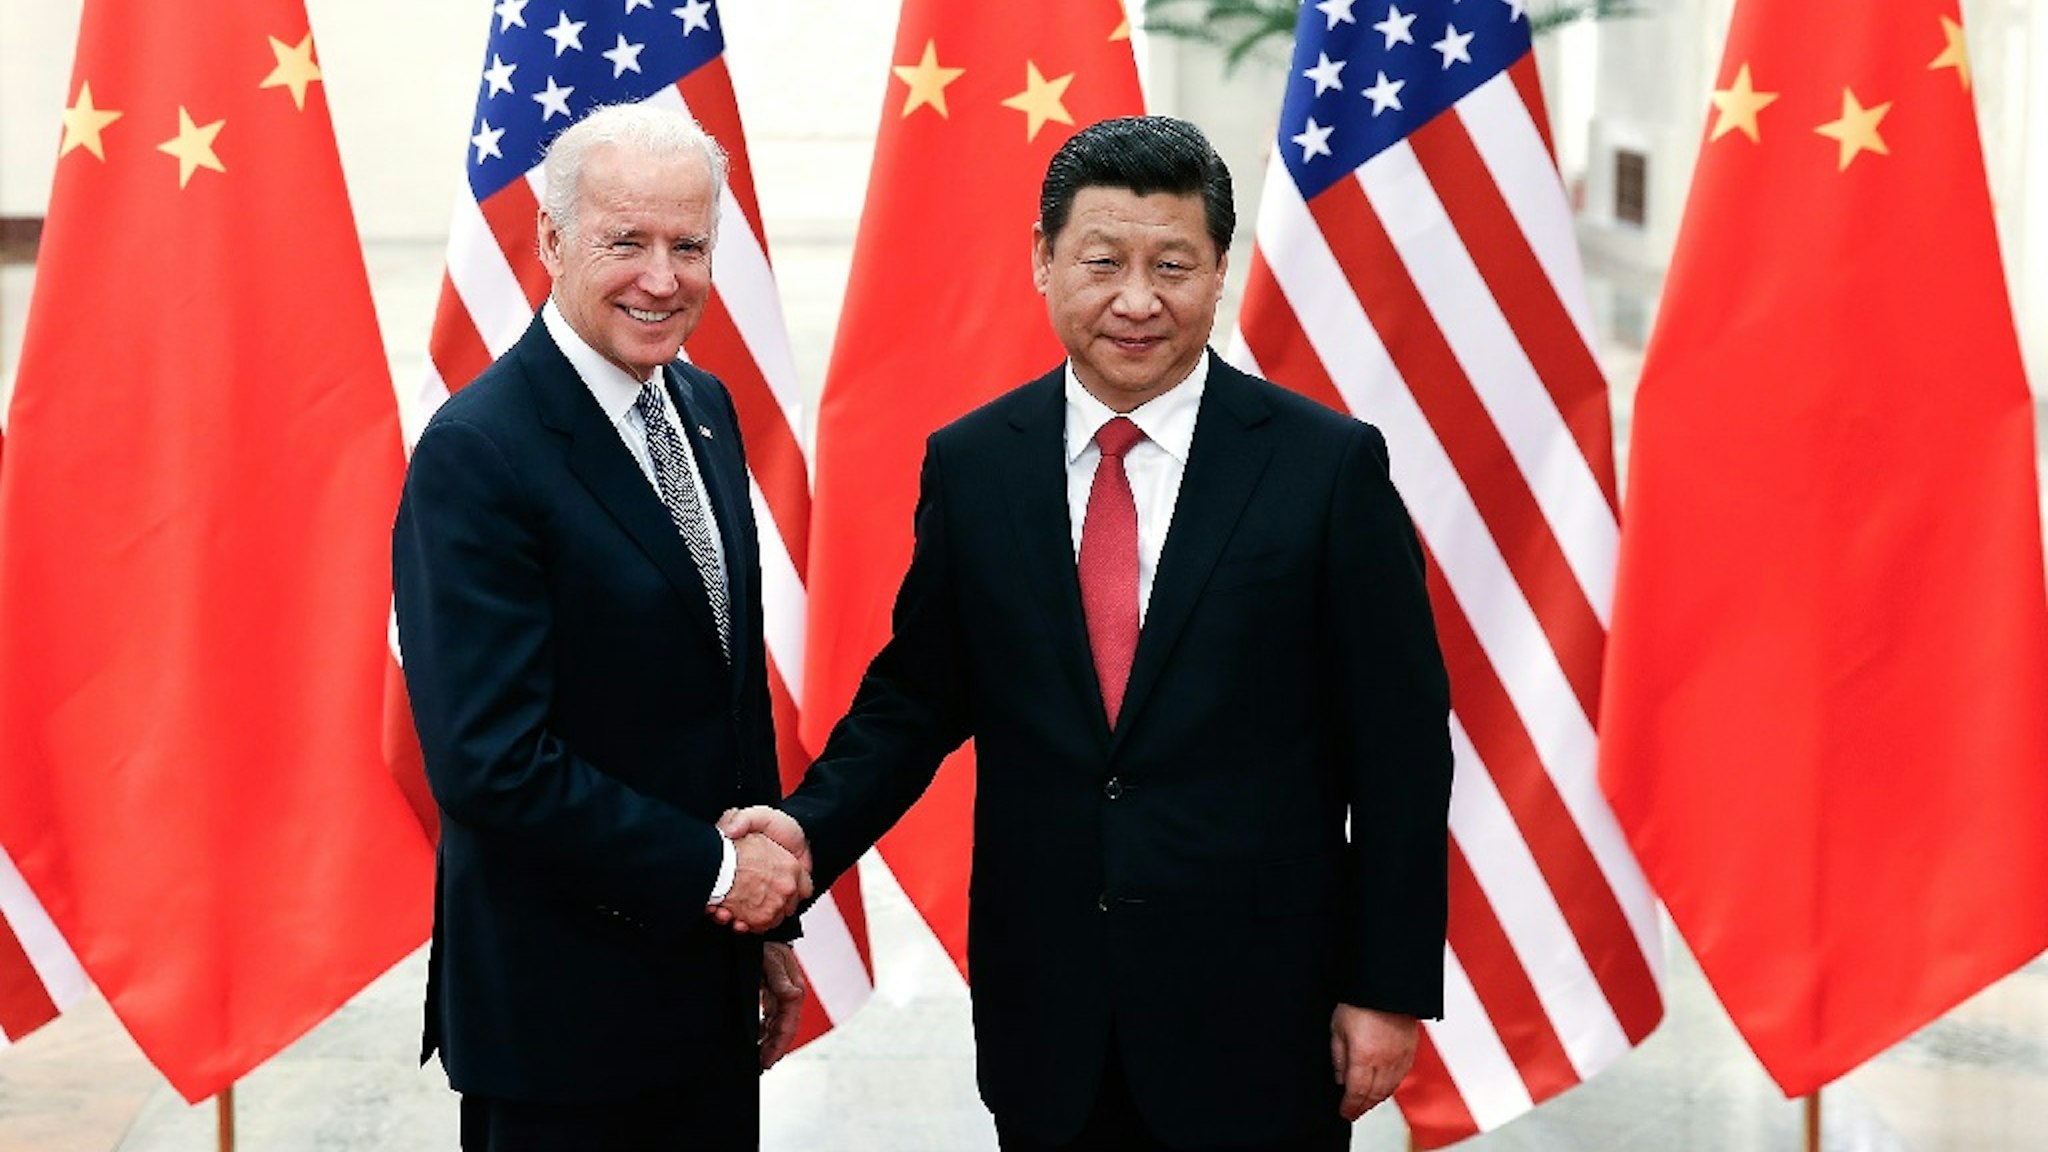 BEIJING, CHINA - DECEMBER 04: Chinese President Xi Jinping (R) shake hands with U.S Vice President Joe Biden (L) inside the Great Hall of the People on December 4, 2013 in Beijing, China.